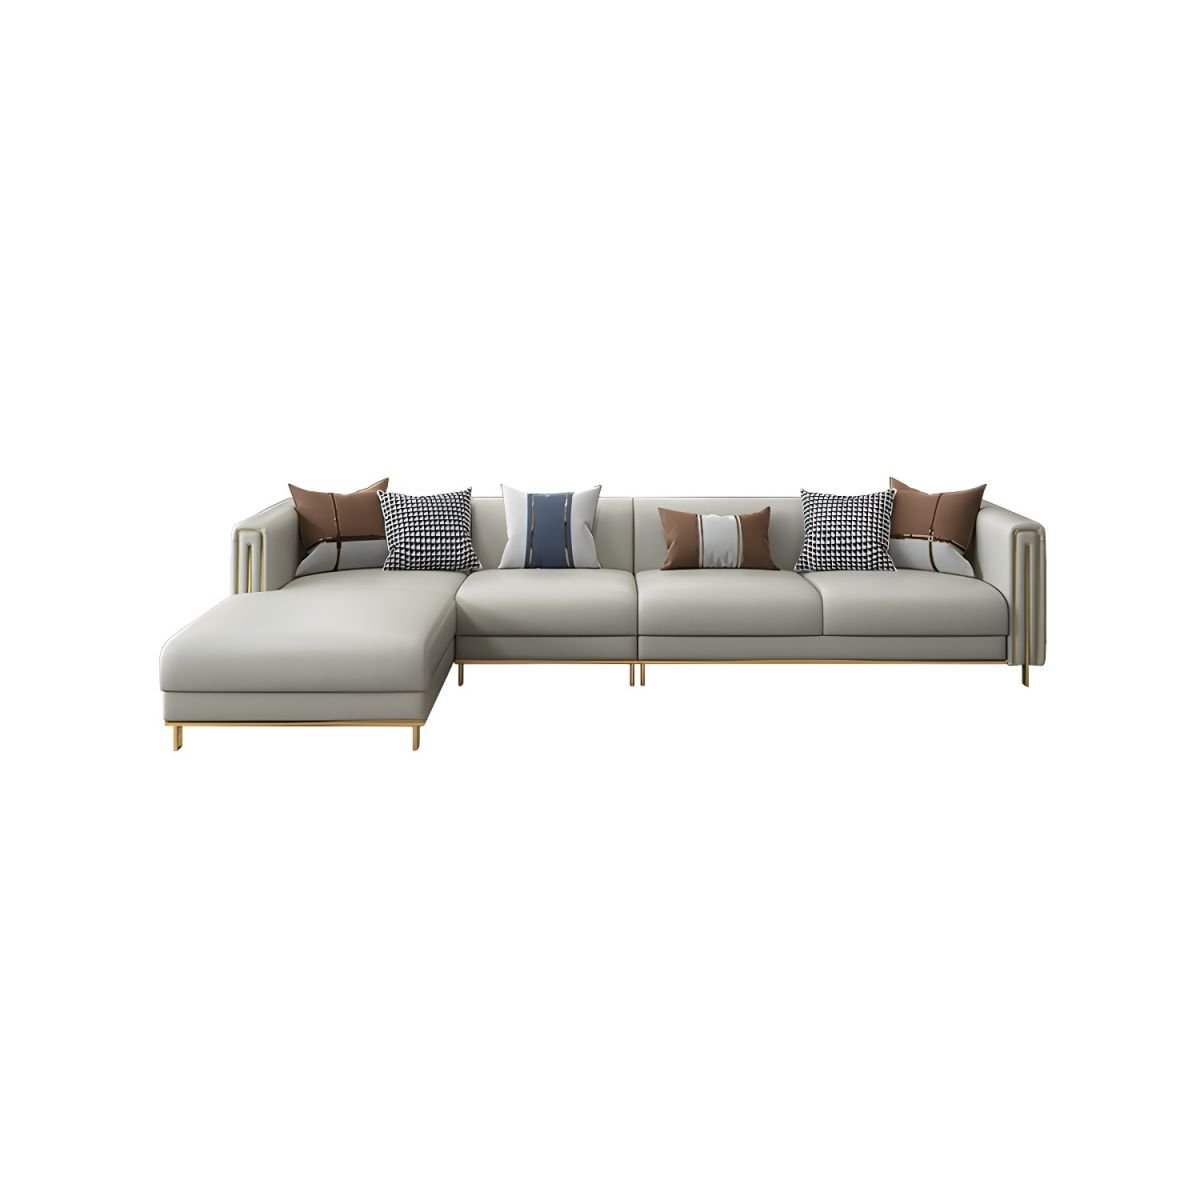 Beige Glam L-Shape Wooden Nappa Sofa Chaise with Square Arm, 26' Length - Left Nappa 120"L x 67"W x 29"H